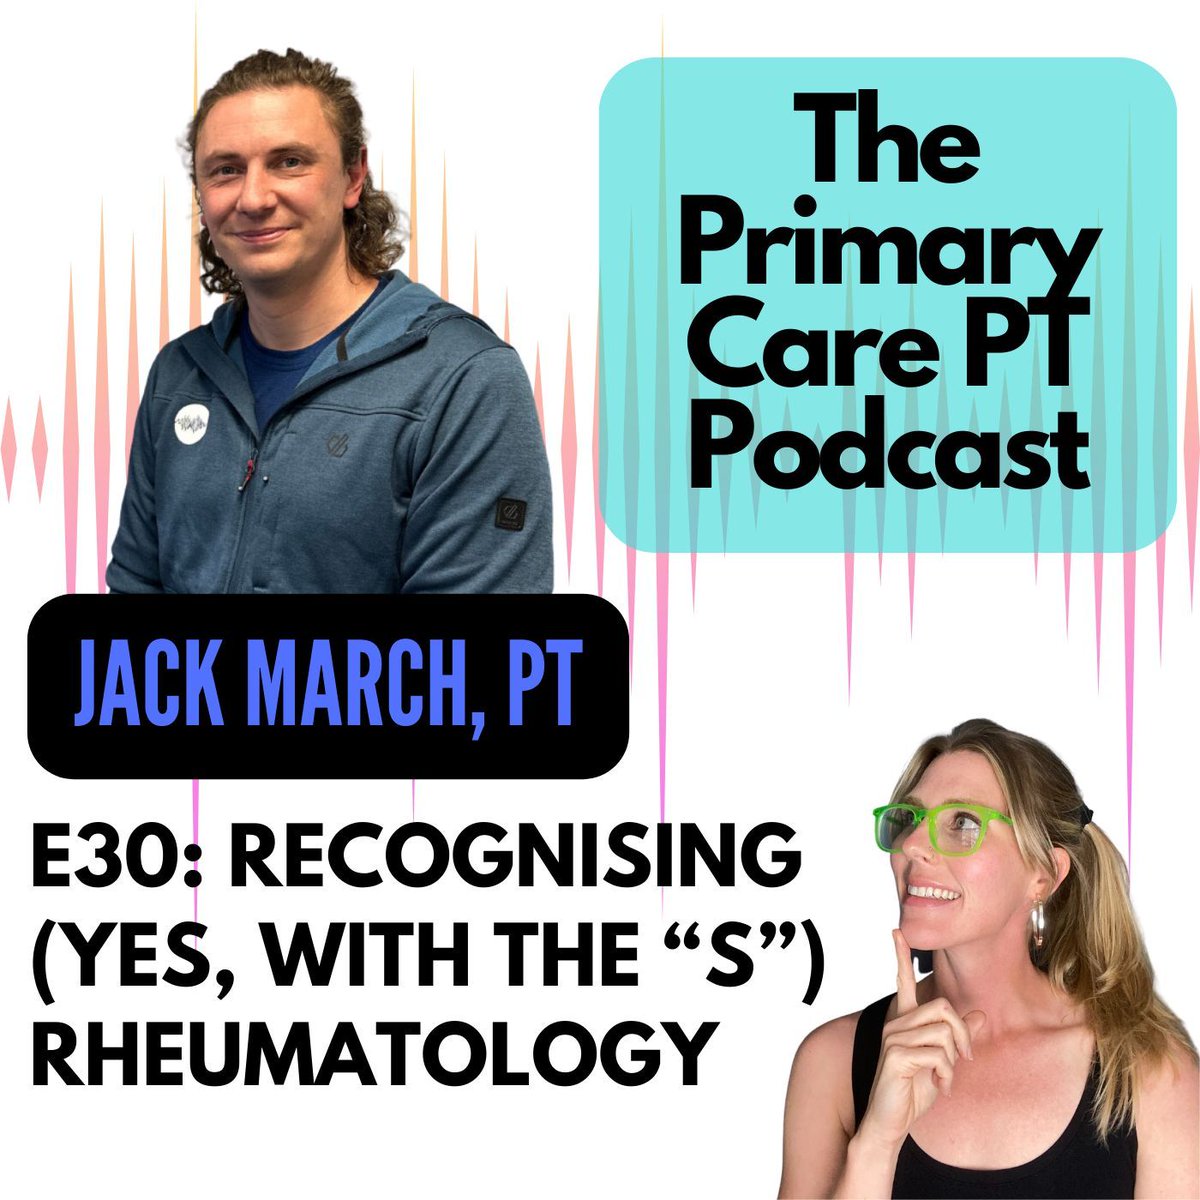 New on the Podcast!  Jack March joins 'The Primary Care PT Podcast' to discuss all things RHEUMATOLOGY on this episode

Listen Now:  buff.ly/48bZrK6 

#podcast #rheumatology #primarycare #physicaltherapy #holisticcare #wholepersoncare